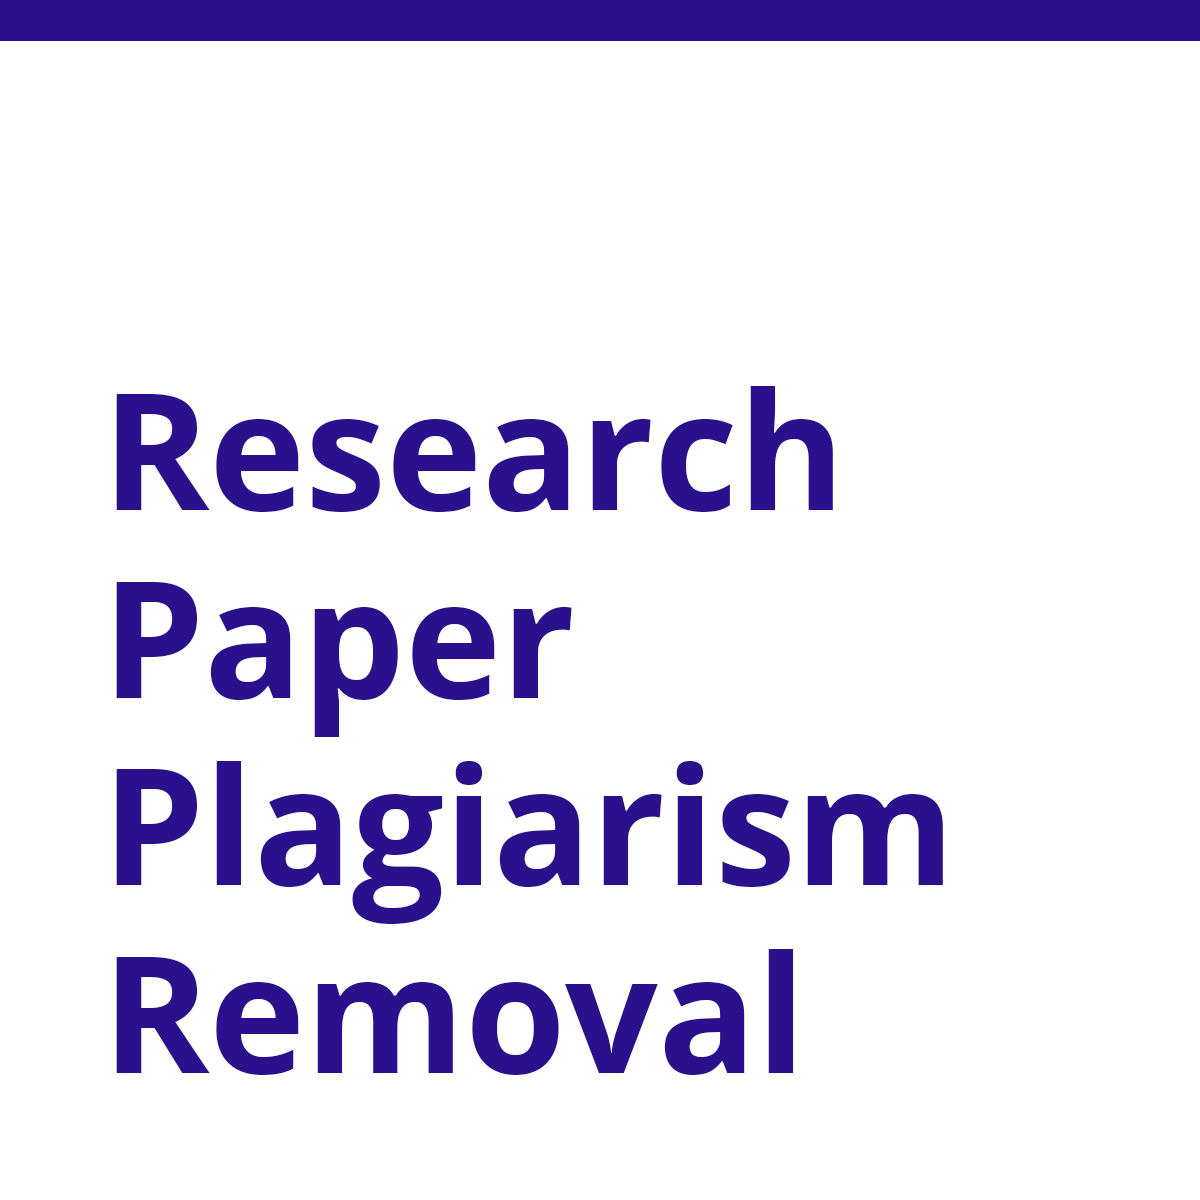 buy research papers no plagiarism cheap